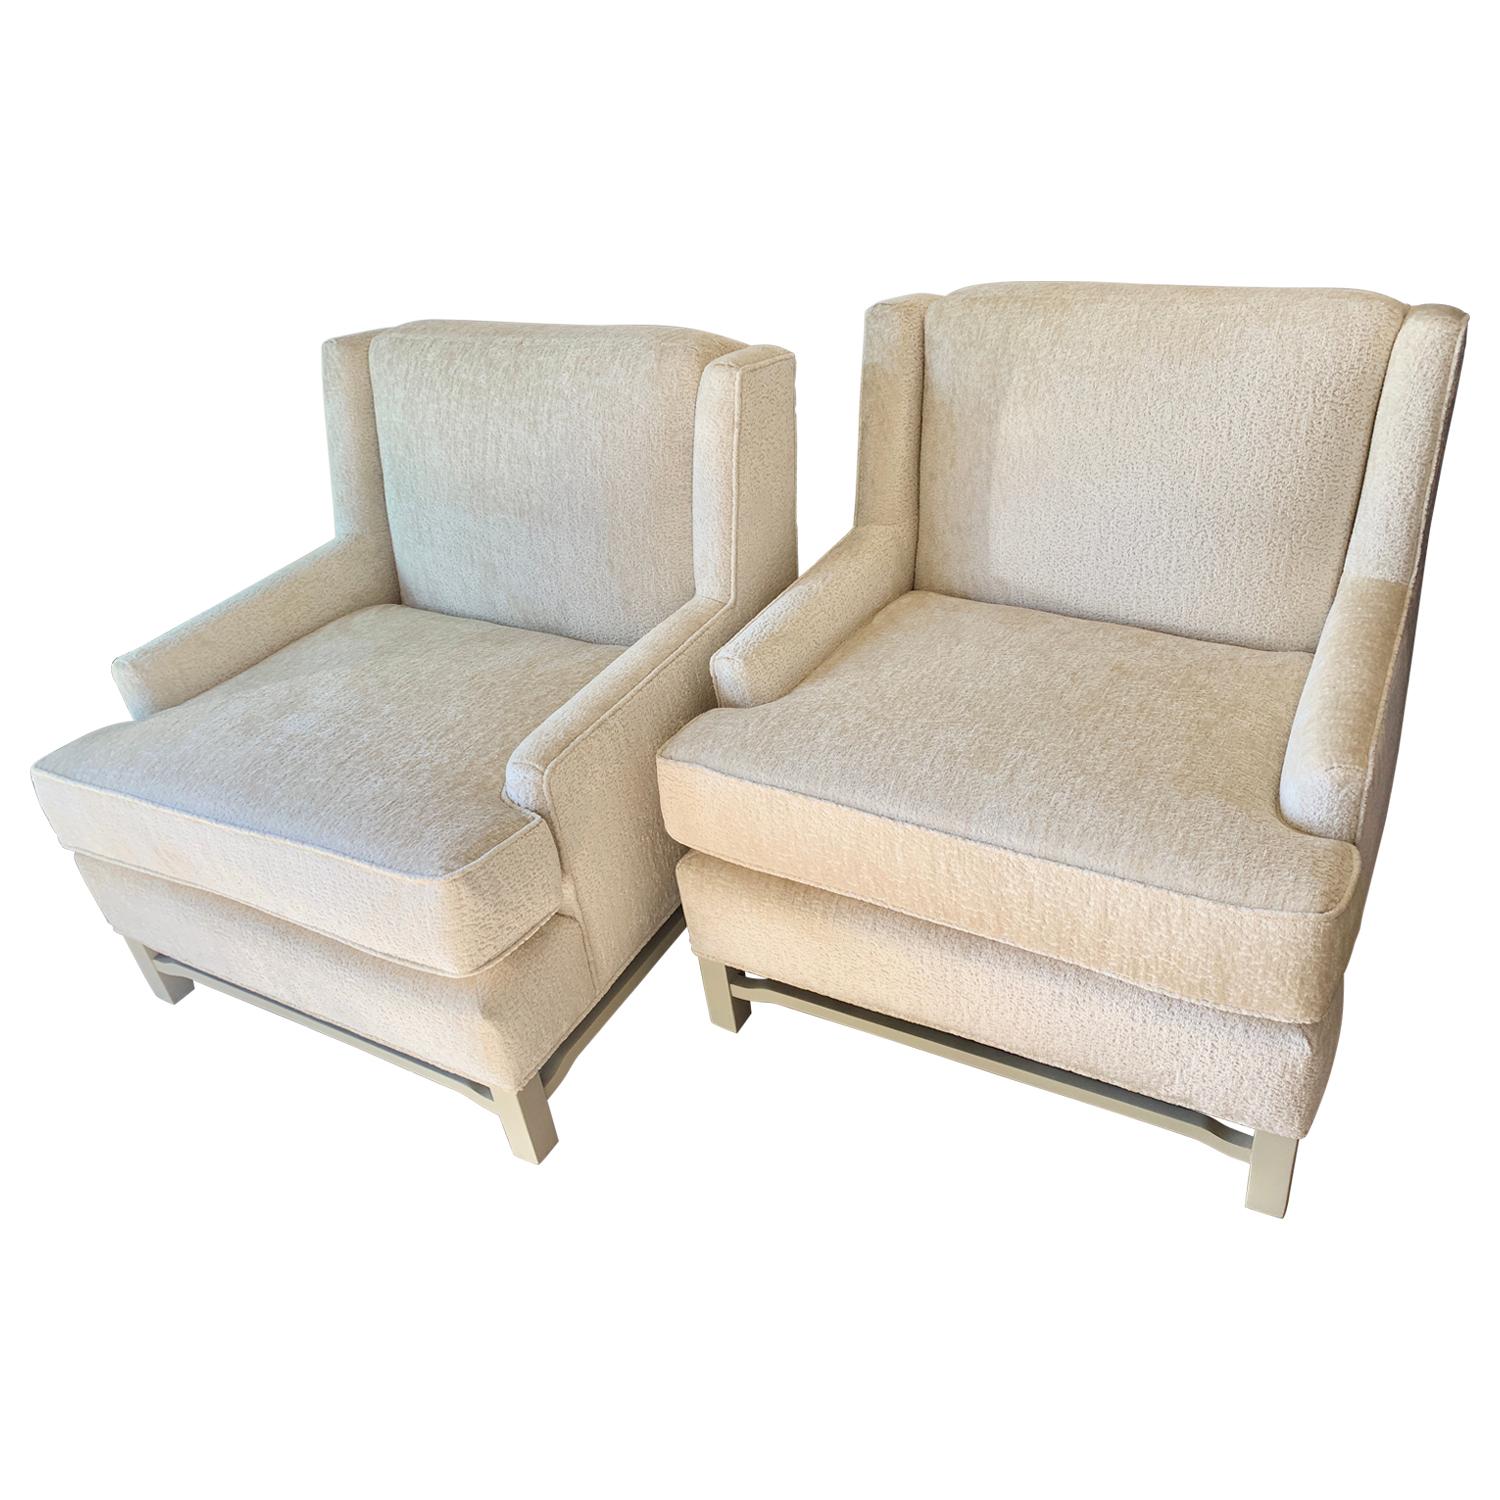 Pair of Midcentury Chairs in Bouclé Upholstery with Lacquered Wood Frame